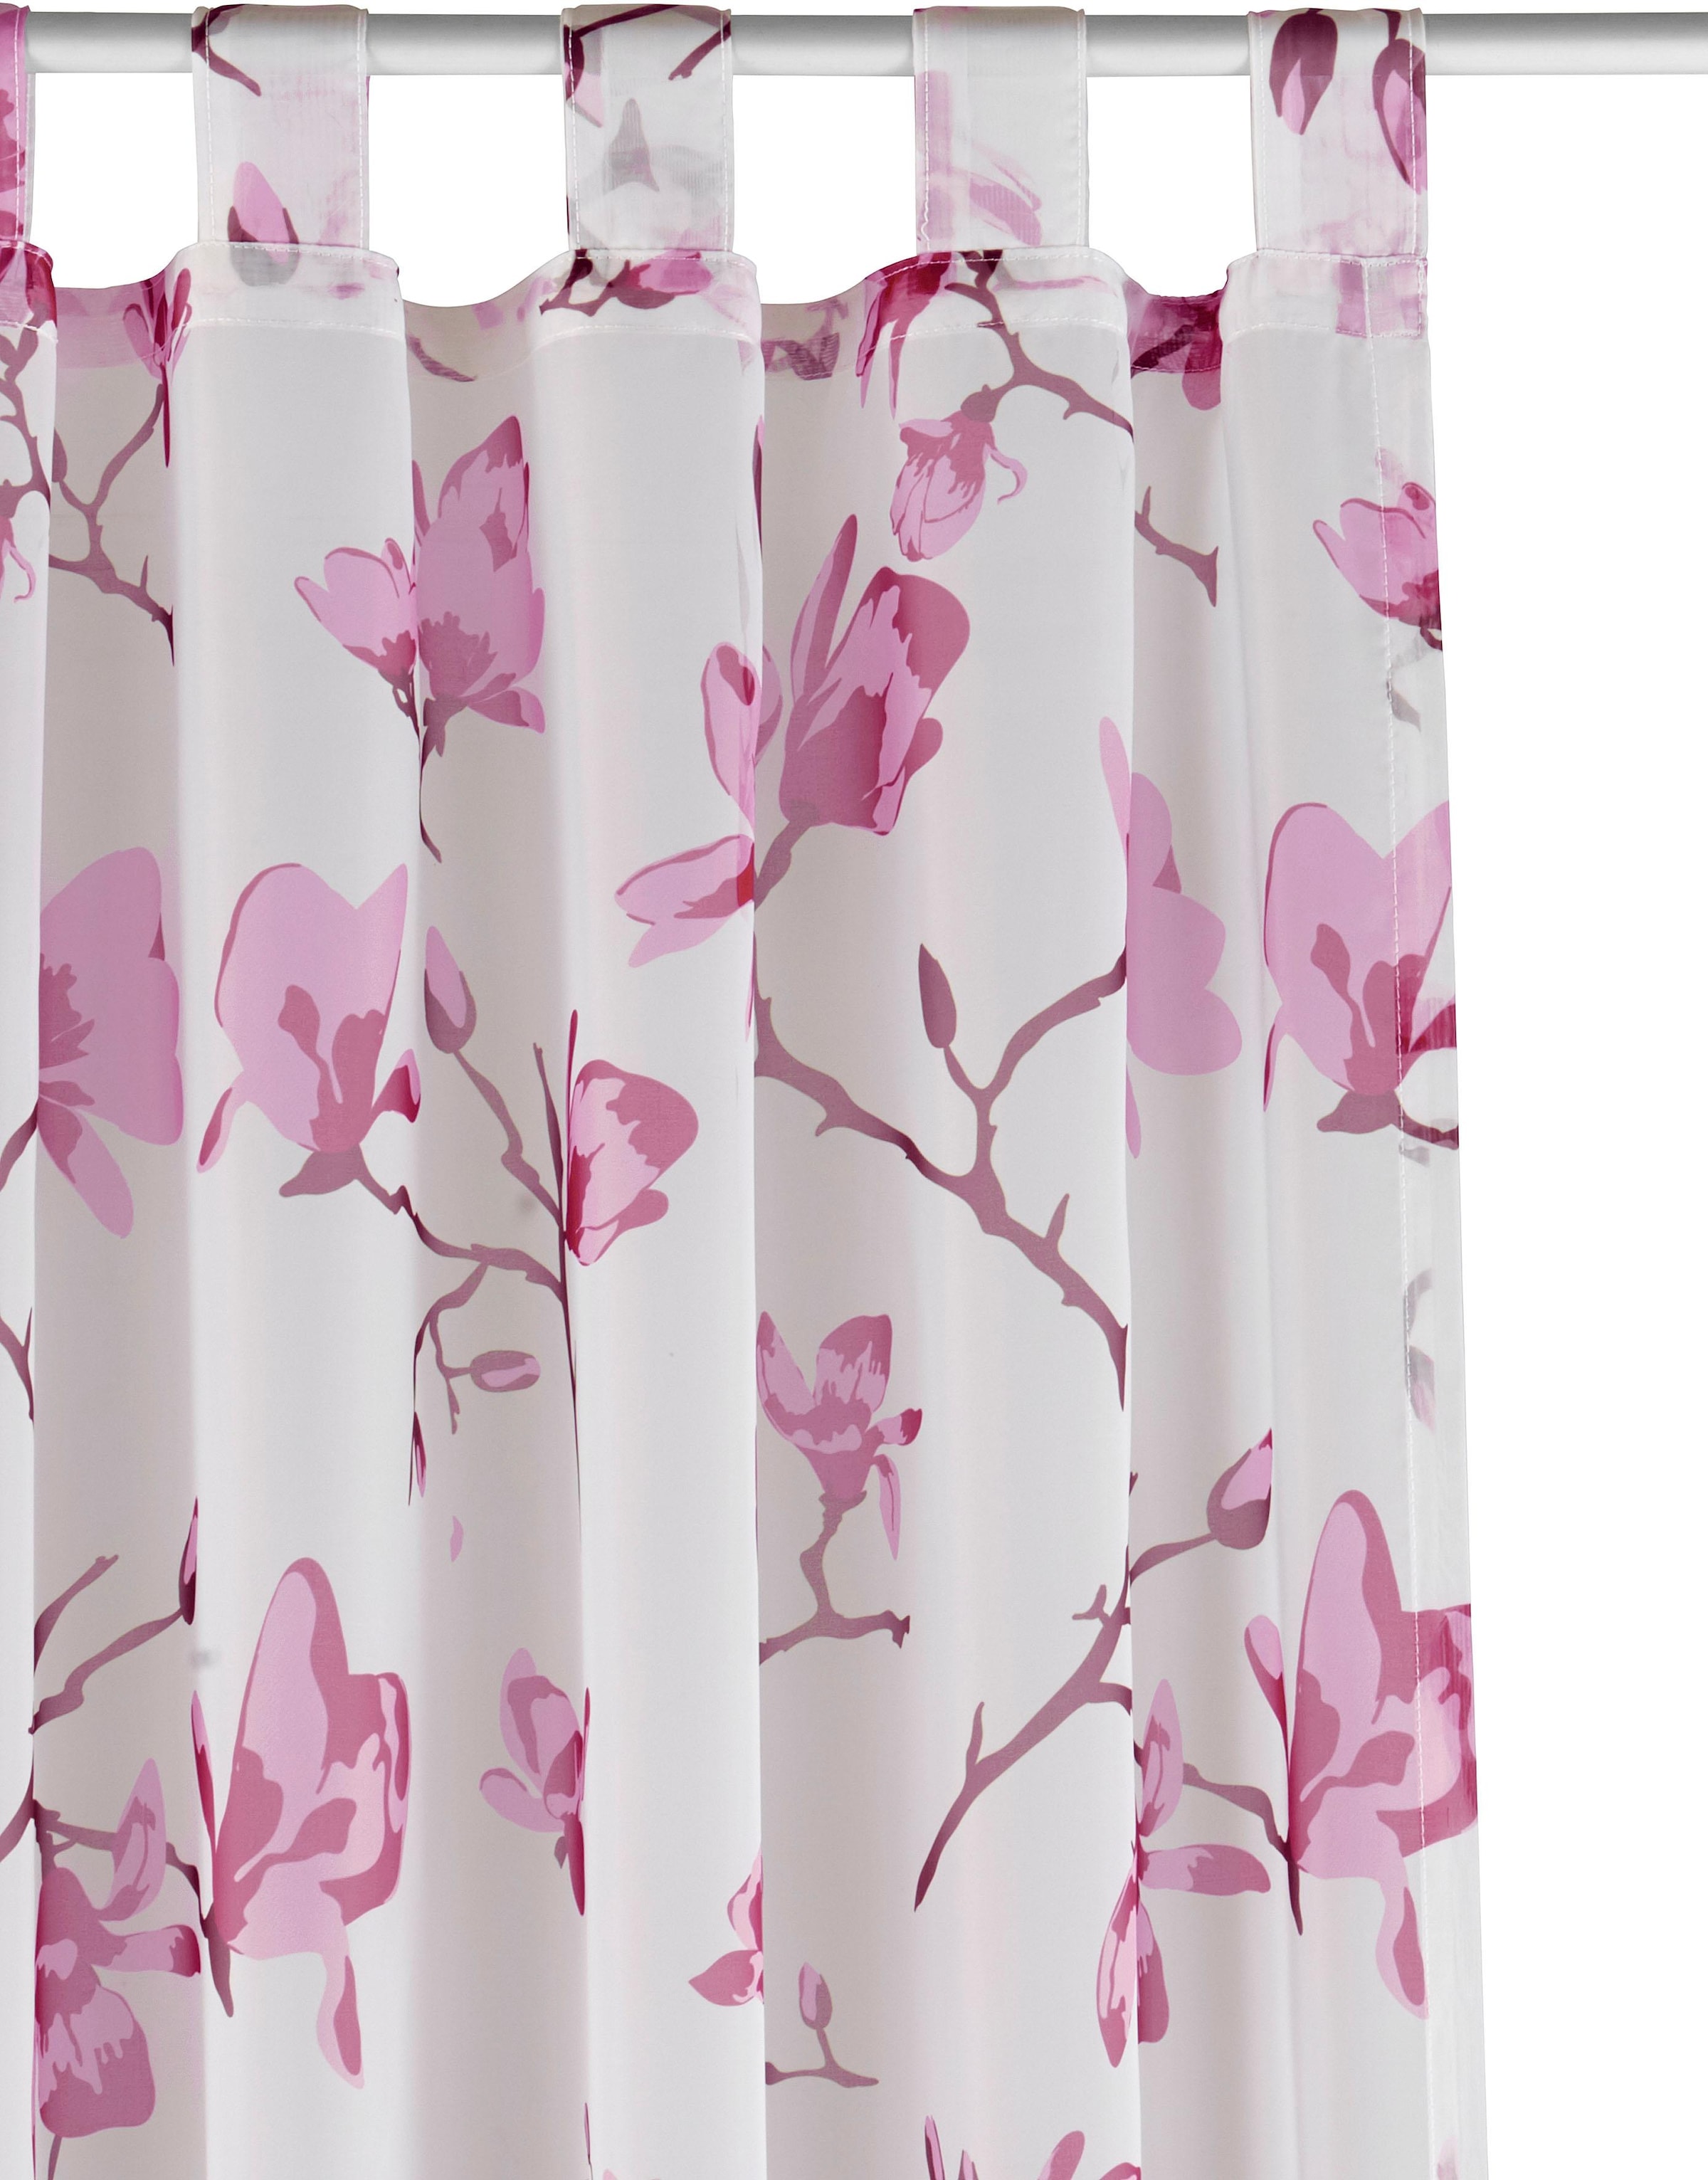 Polyester »Orchidee«, Gardine my Transparent, St.), Voile, home (1